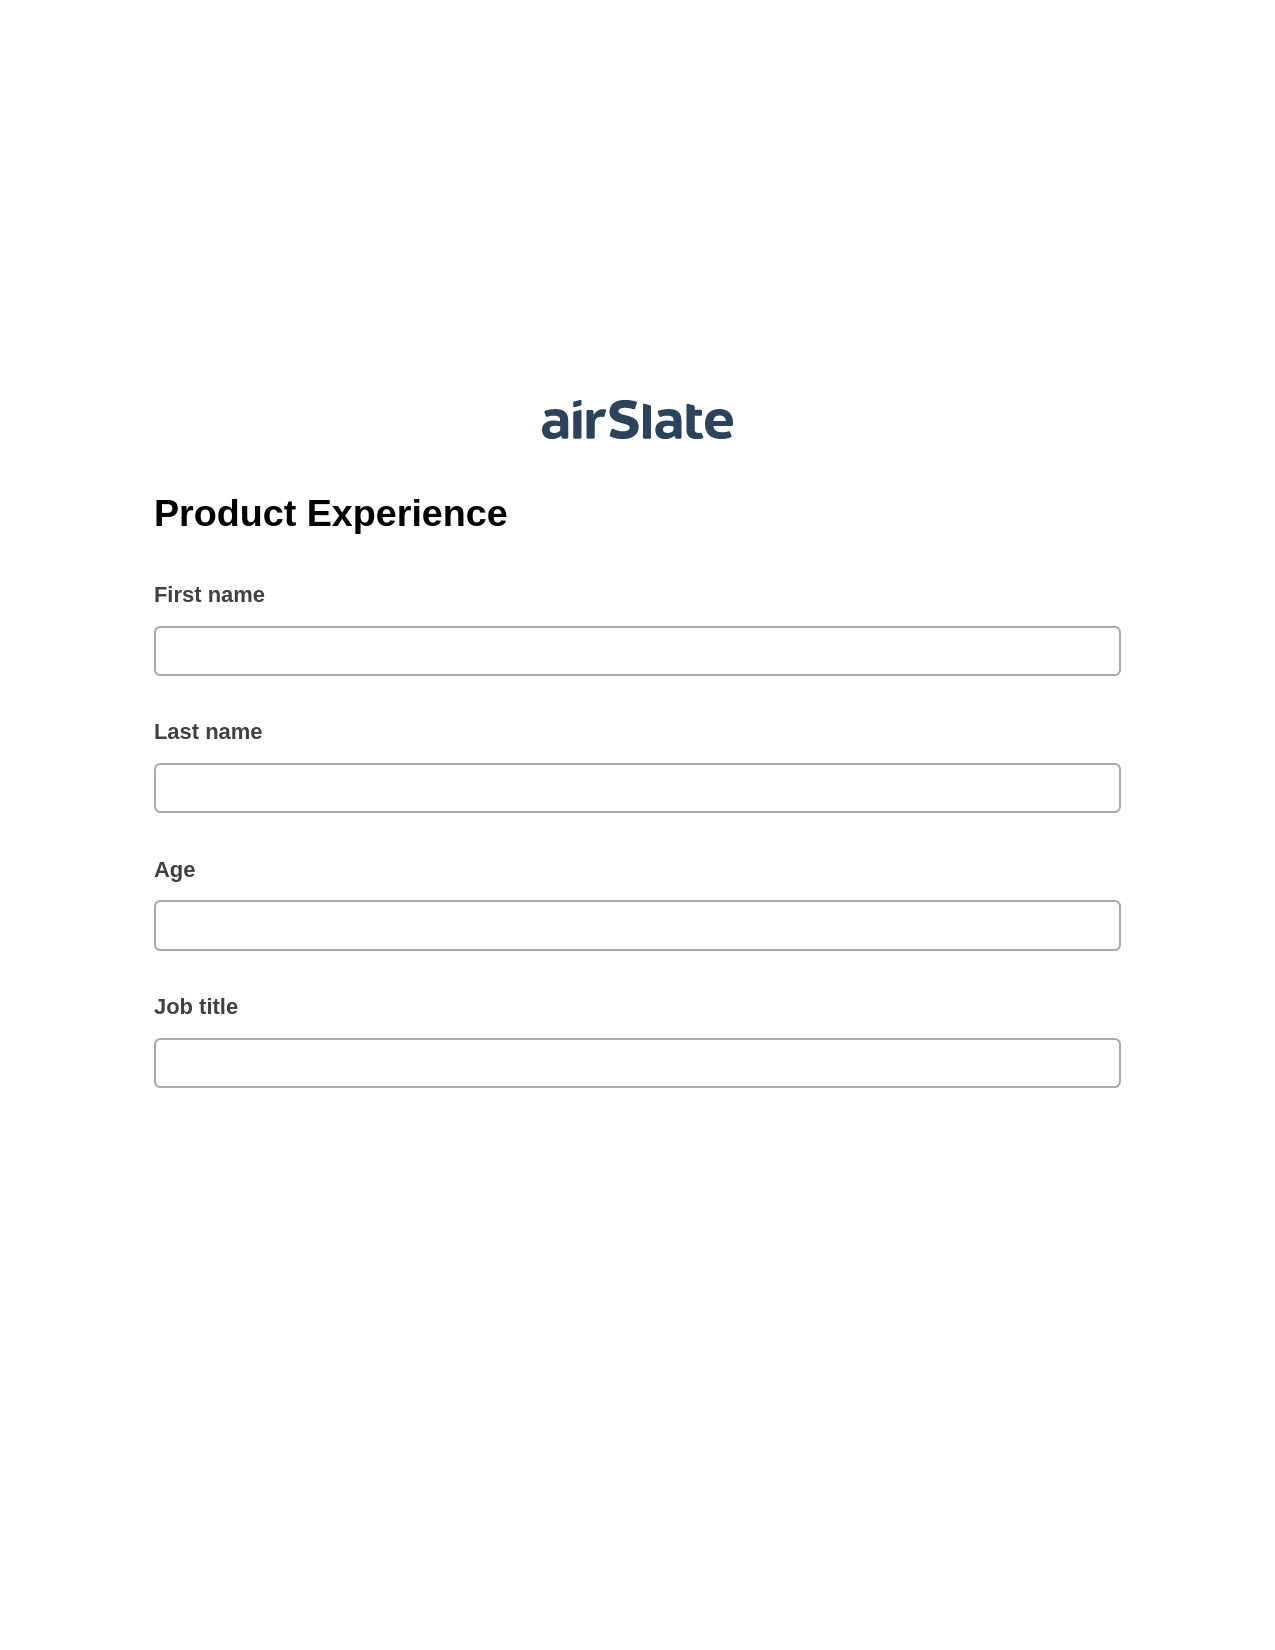 Multirole Product Experience Pre-fill Document Bot, Webhook Bot, Export to Google Sheet Bot